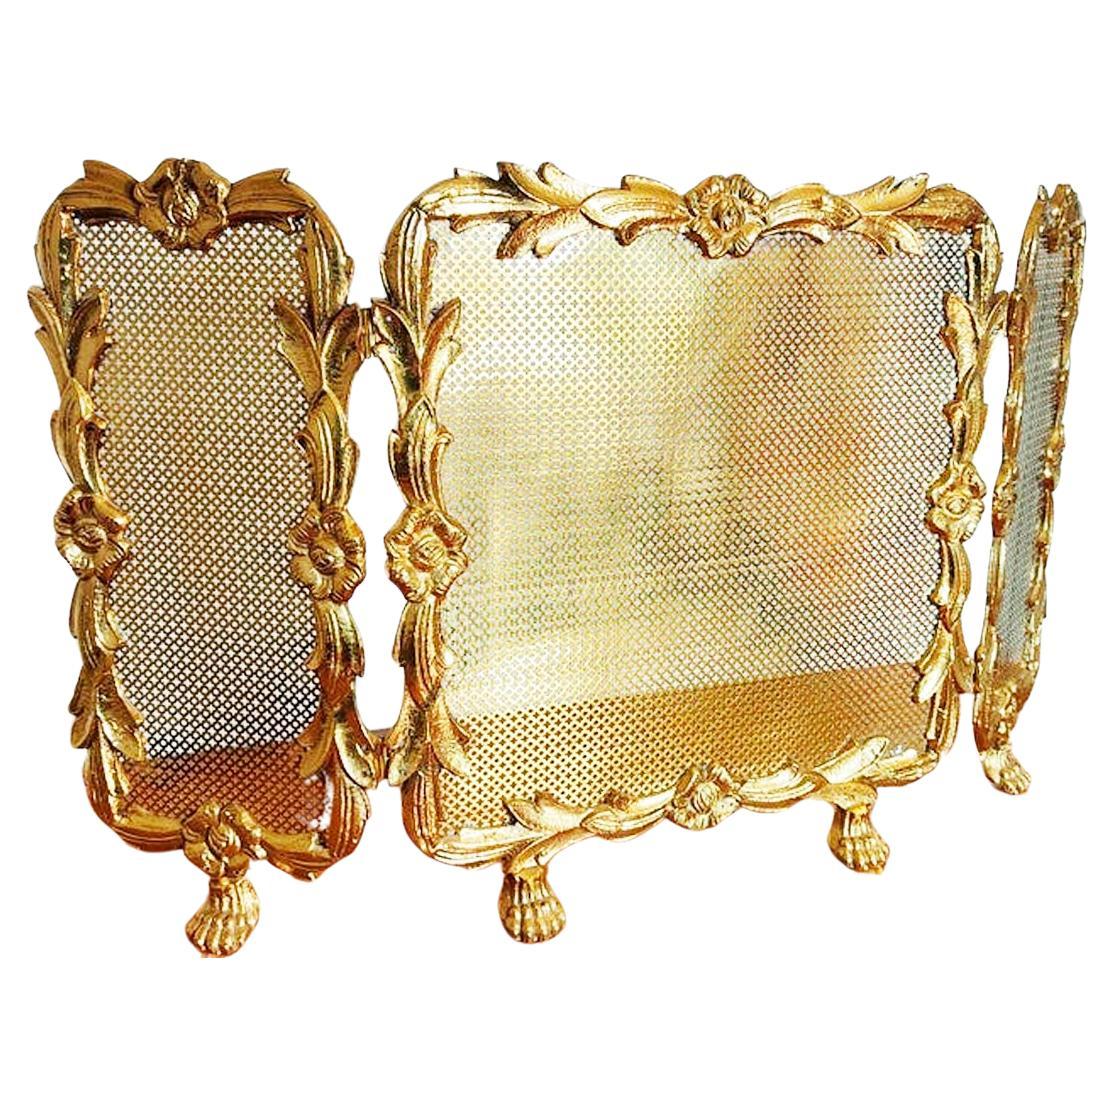 Three-panel fire screen bronze or brass

Fire Sceen ,original.

Bronze or brass fire screen. It is foldable with 3 leaves
  It is a brass grille with a garland of flowers and leaves in volume.